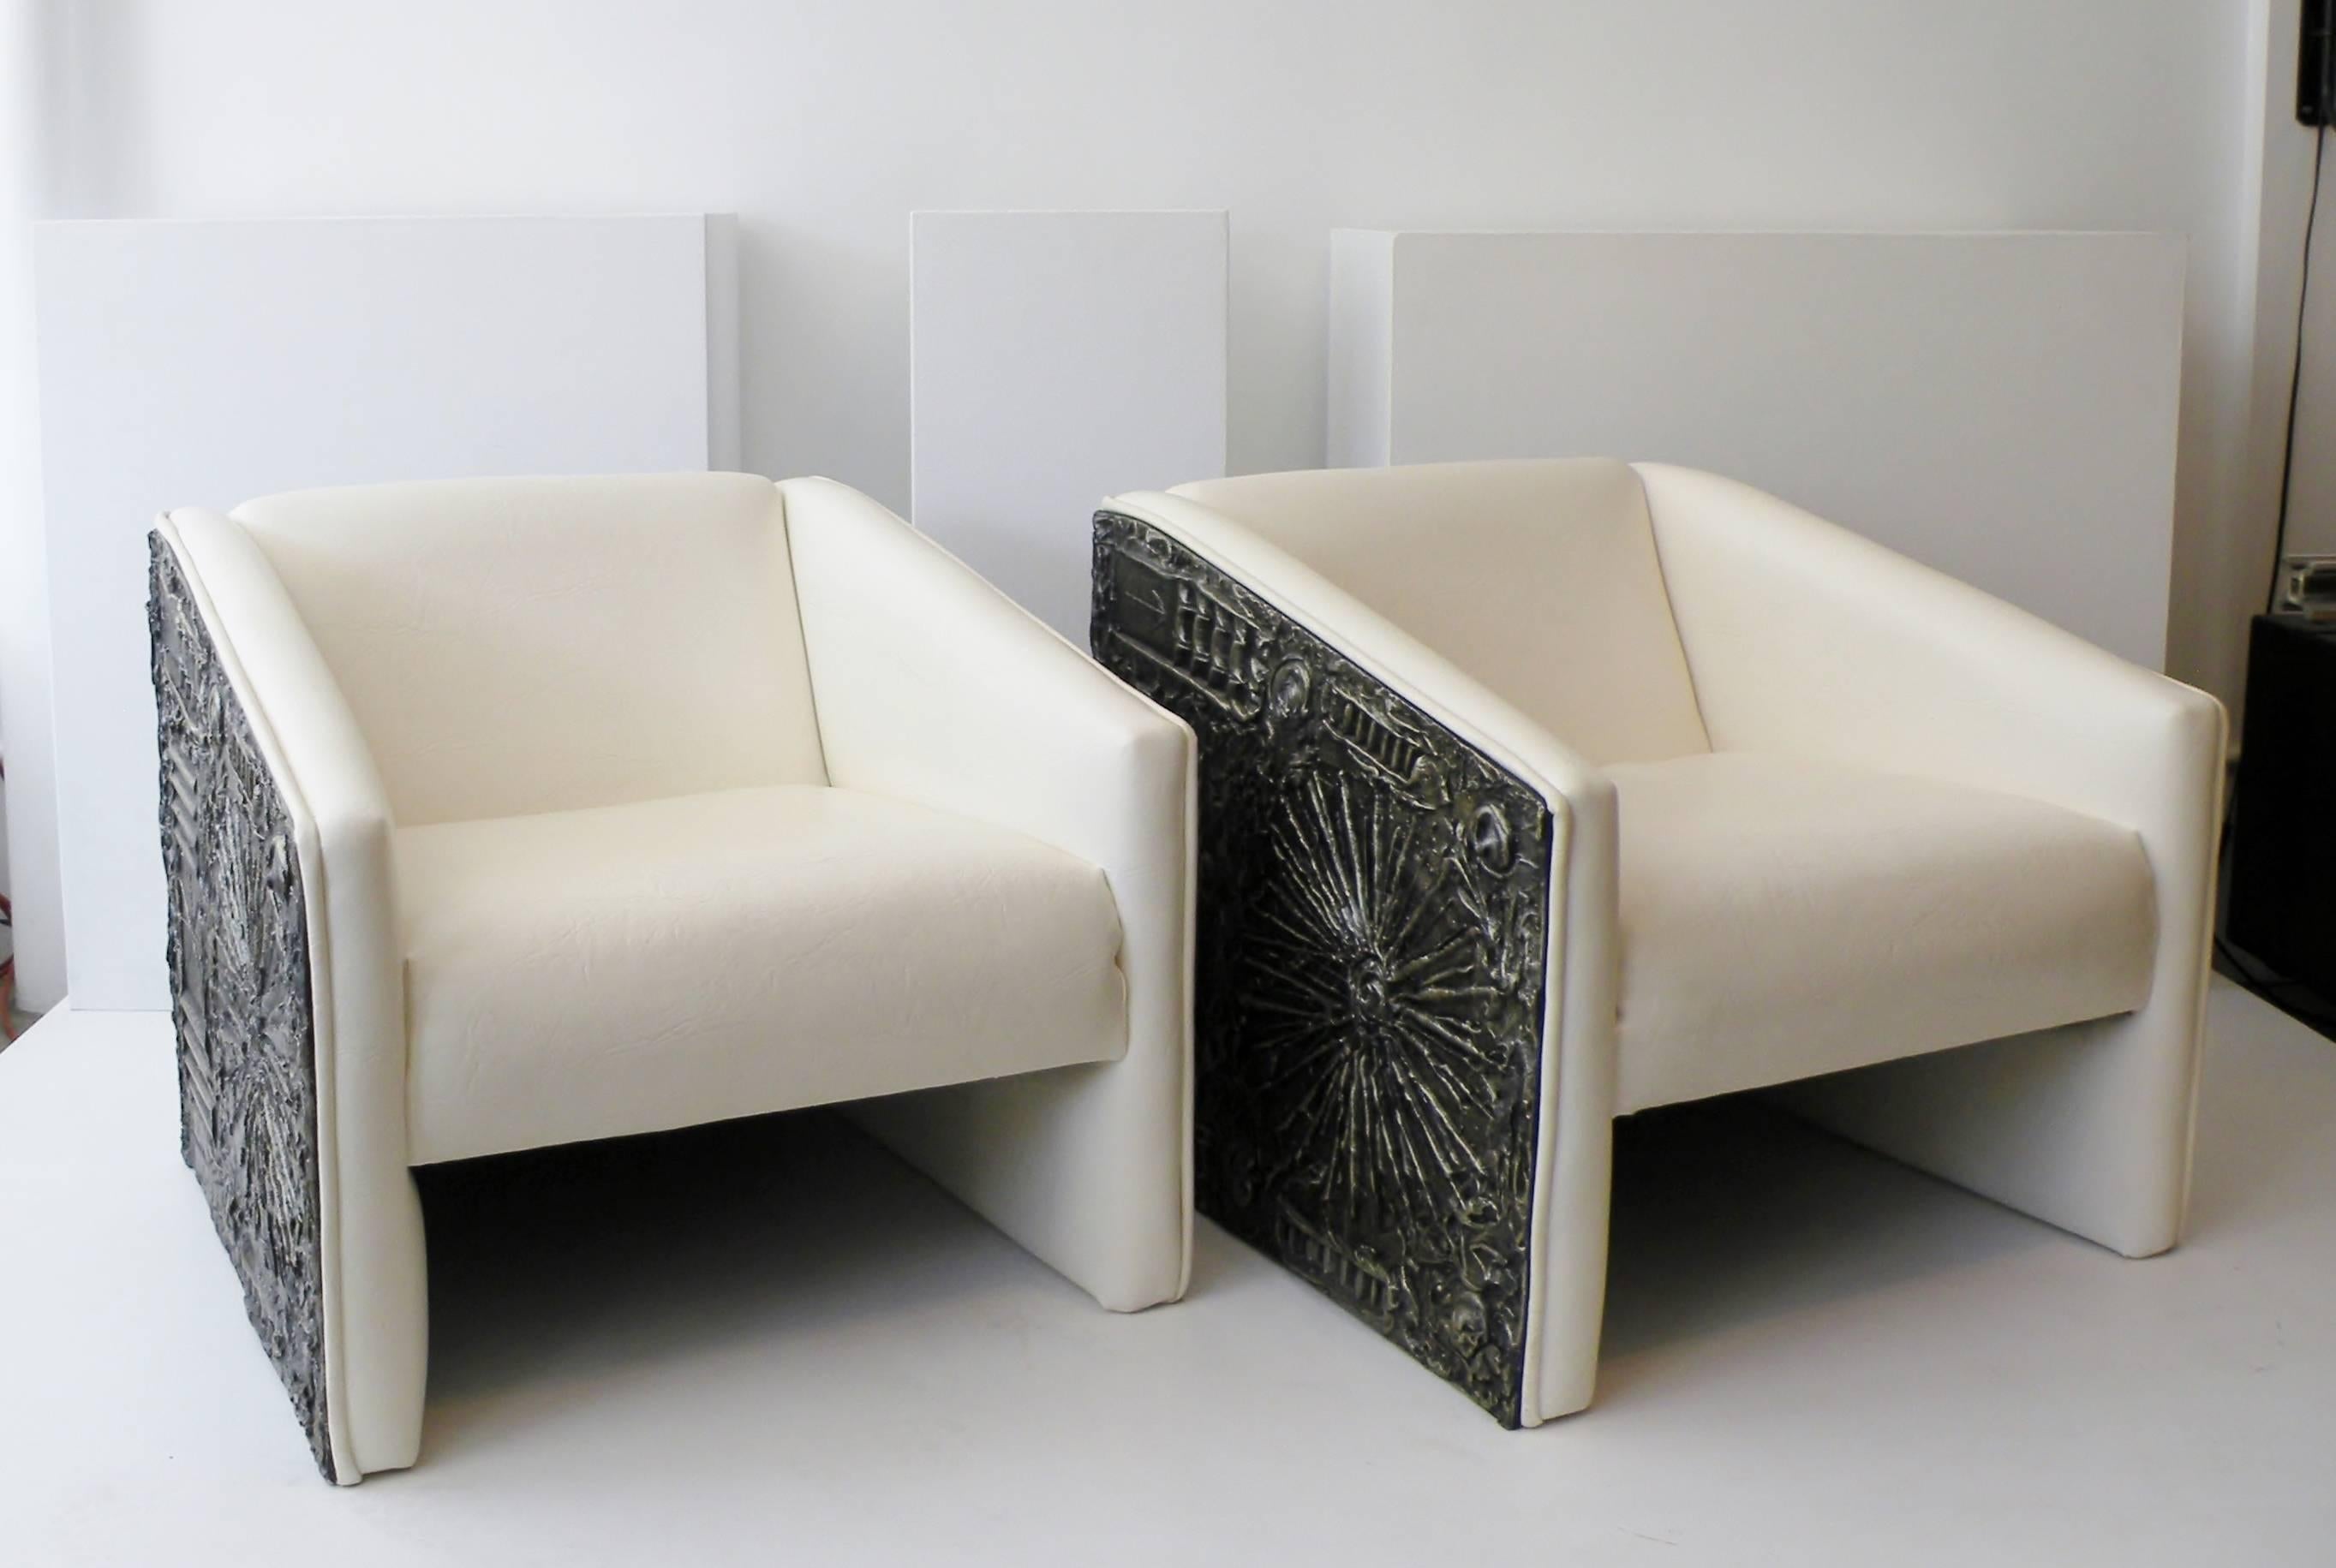 Pair of Adrian Pearsall for his Craft Associates Furniture company tuxedo arm lounge chairs. An Brutalist abstract cast panel to sides and back with original man made off-white textured leather upholstery.